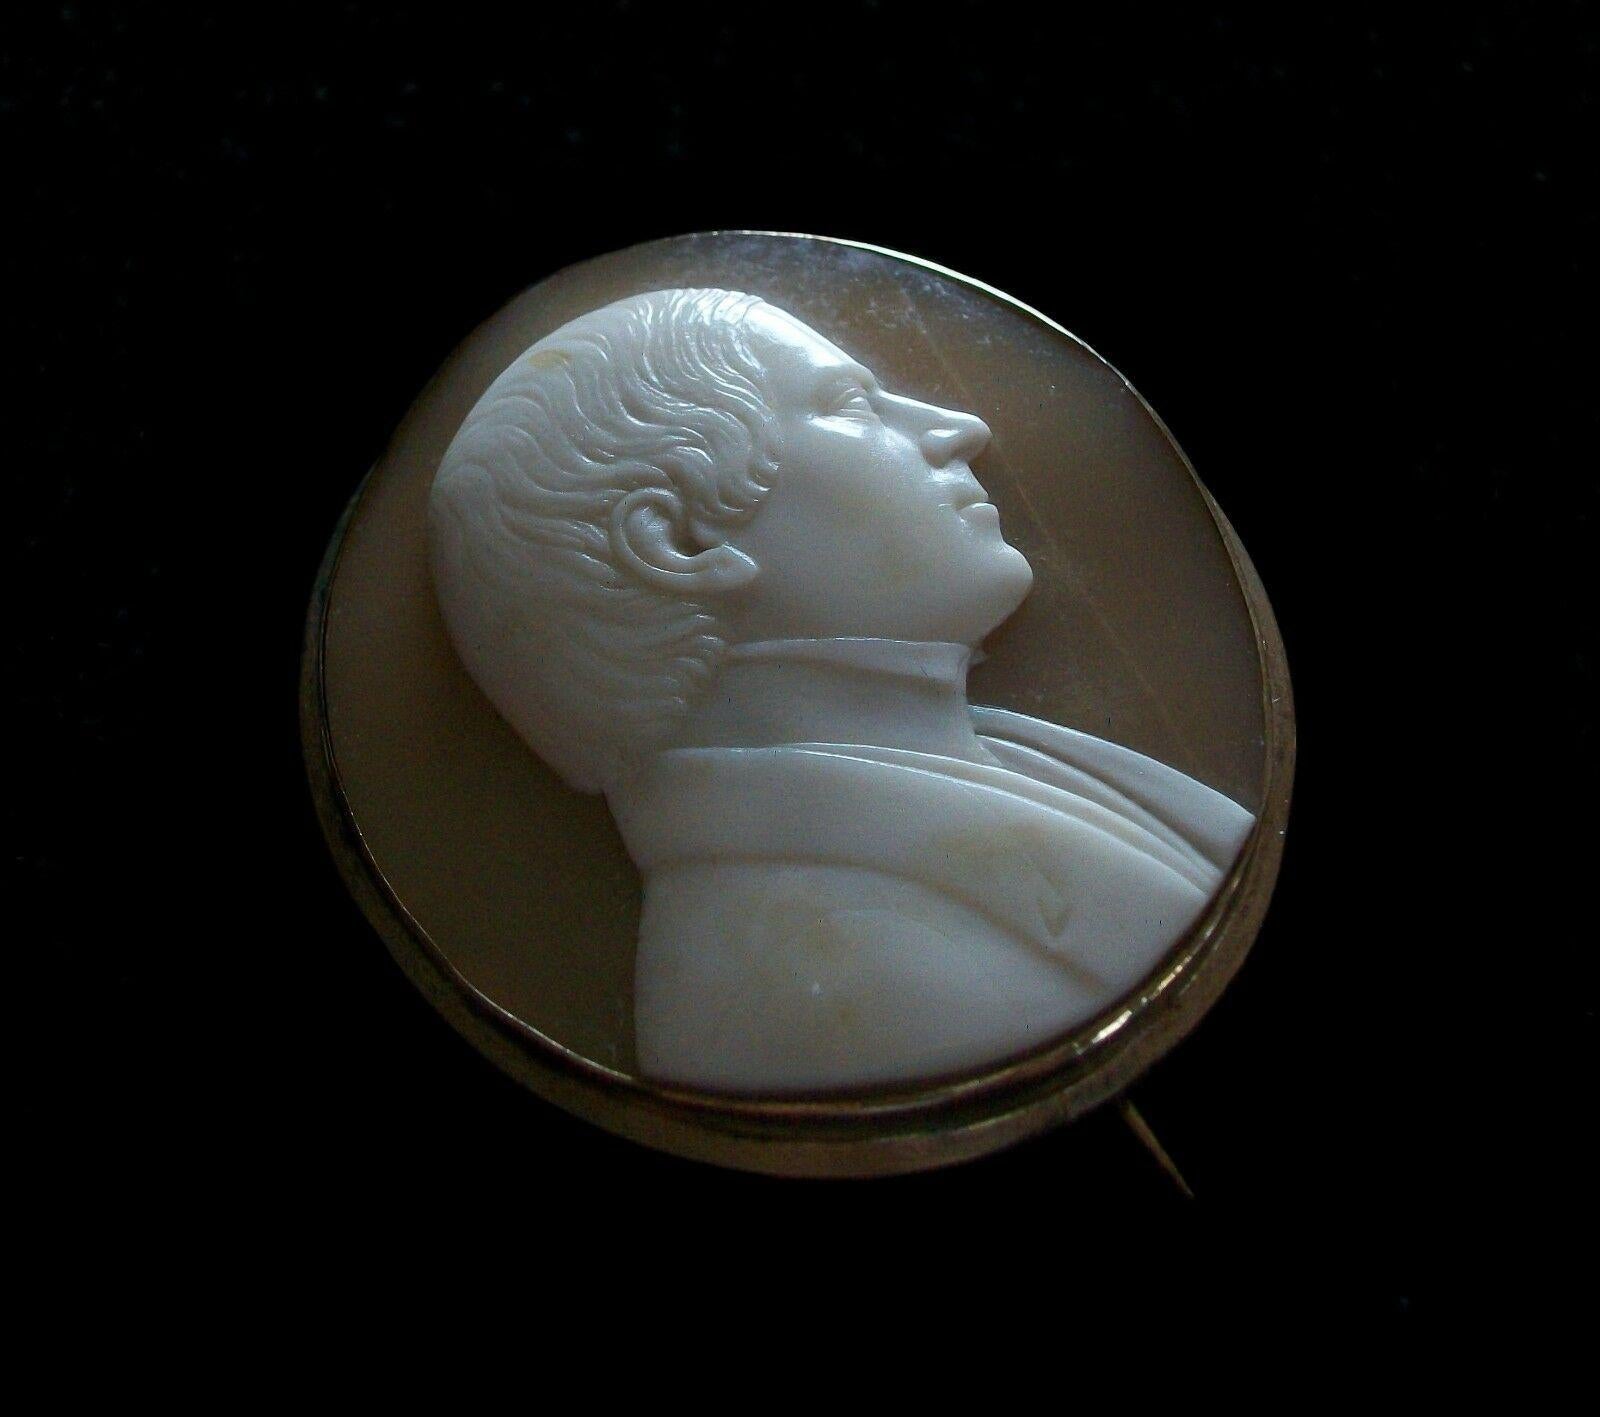 Exceedingly rare Victorian custom made hand carved gentleman's shell cameo brooch or pin - right facing portrait - a sign of wealth and prestige when worn by 18th and 19th century gentlemen (Napoleon wore one on his wedding day) - gold filled